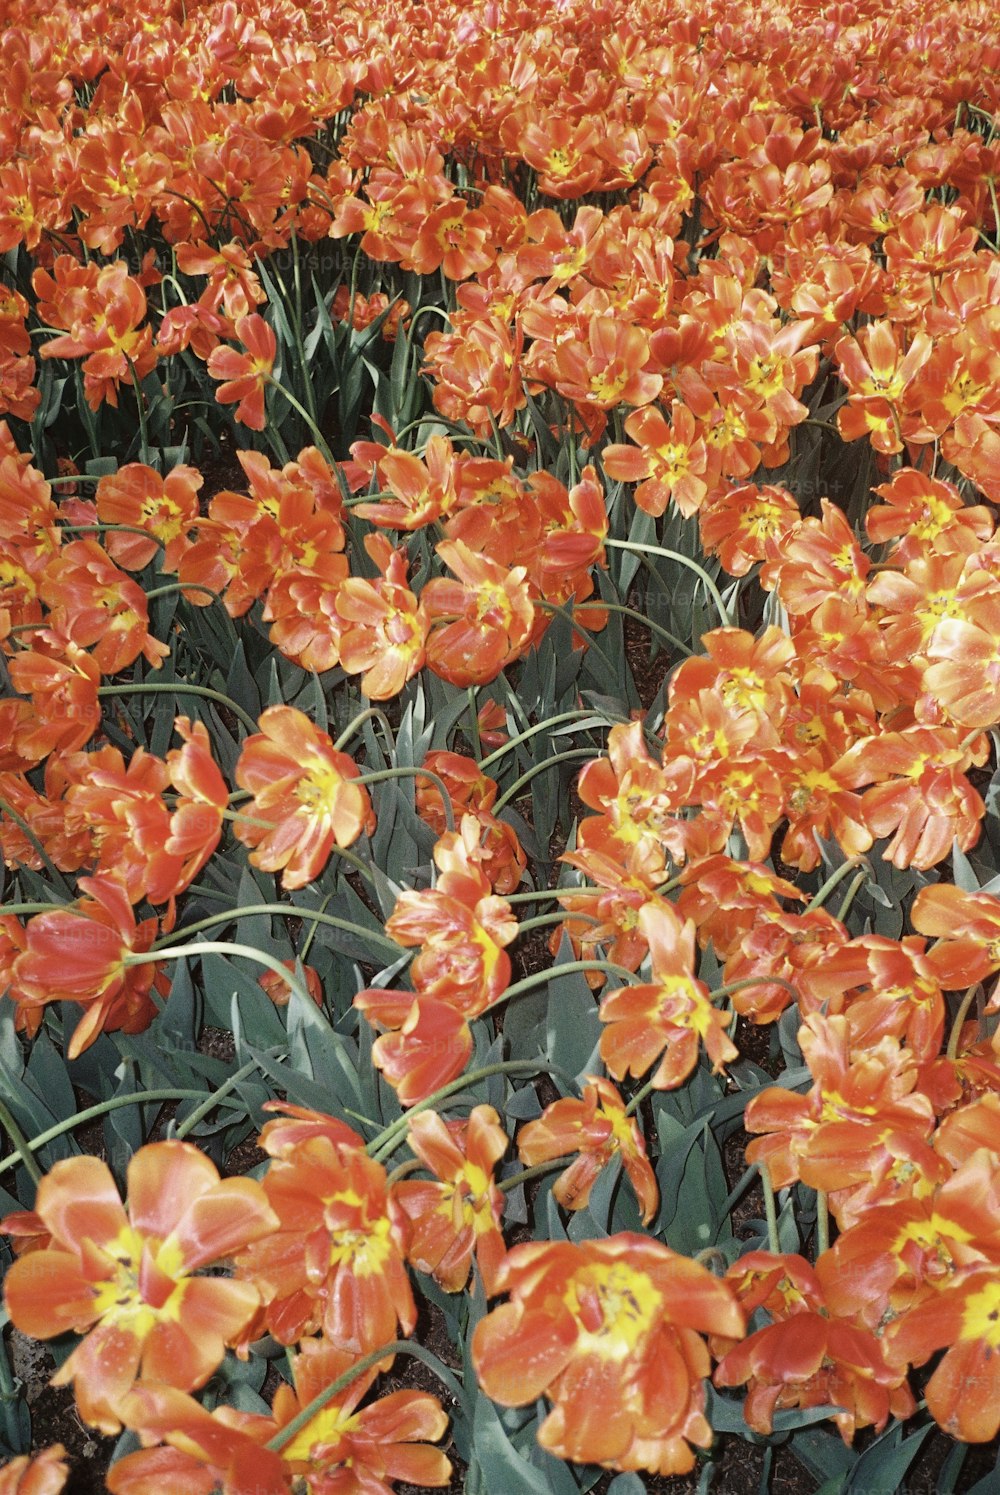 a large field of orange flowers with yellow centers